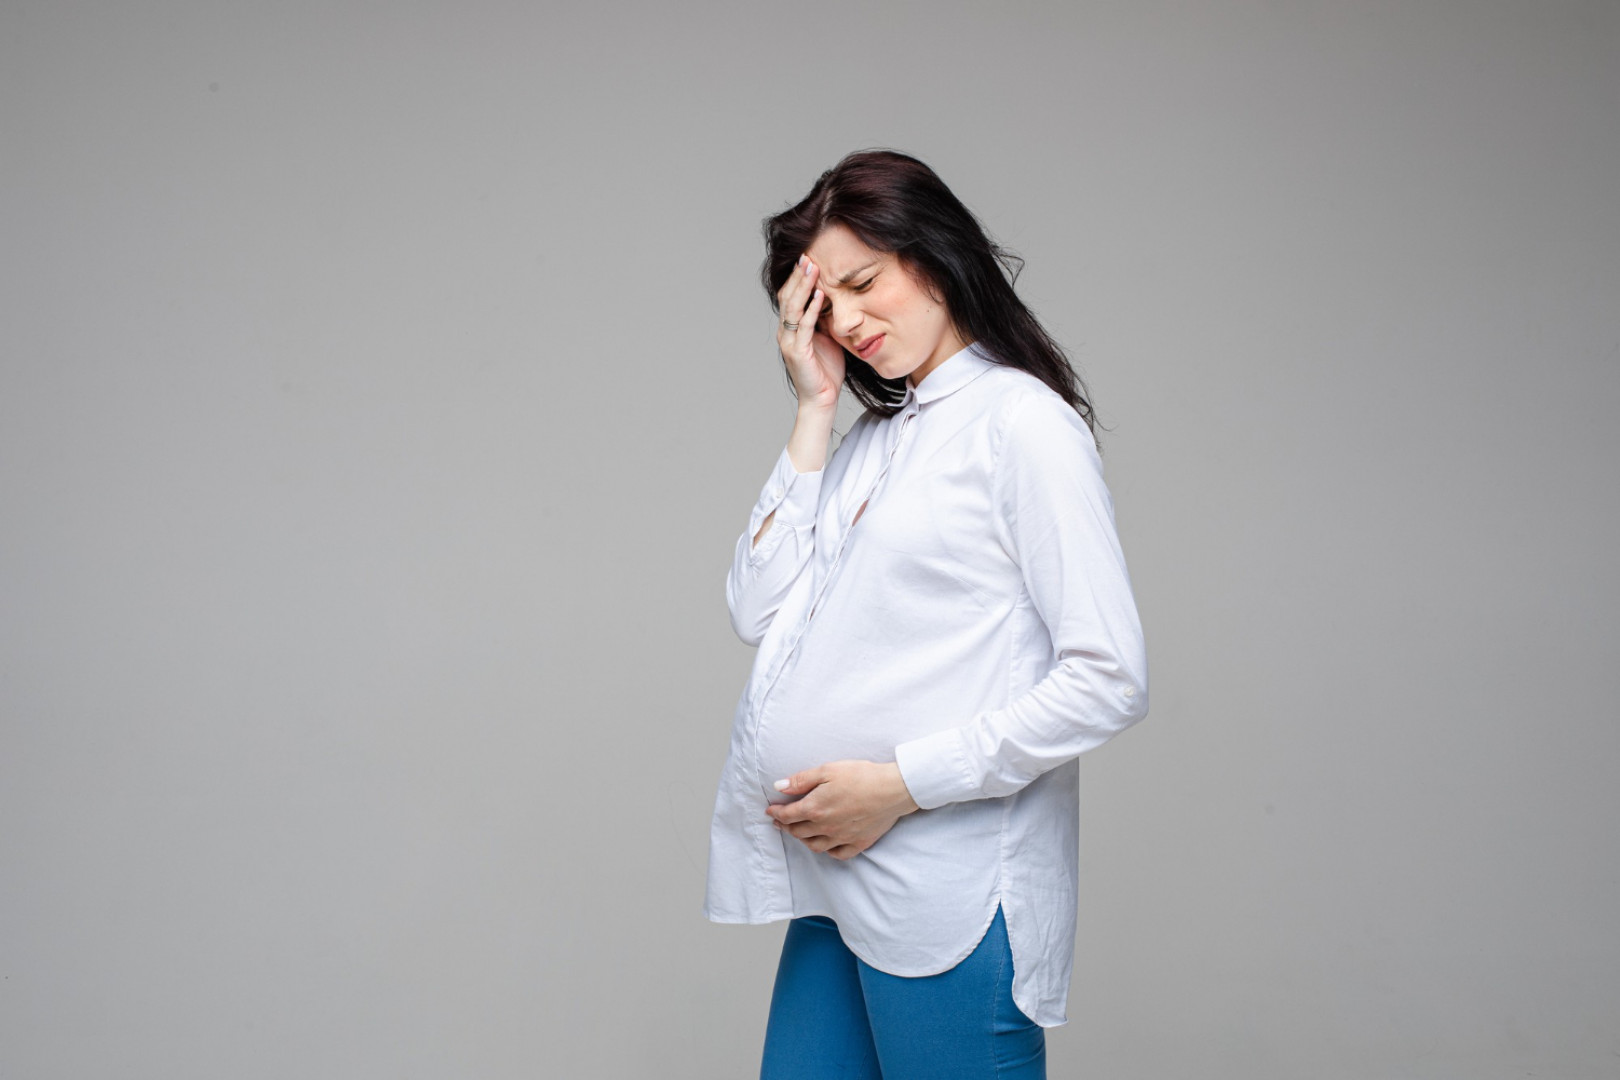 Tips to overcome anxiety and stress before childbirth